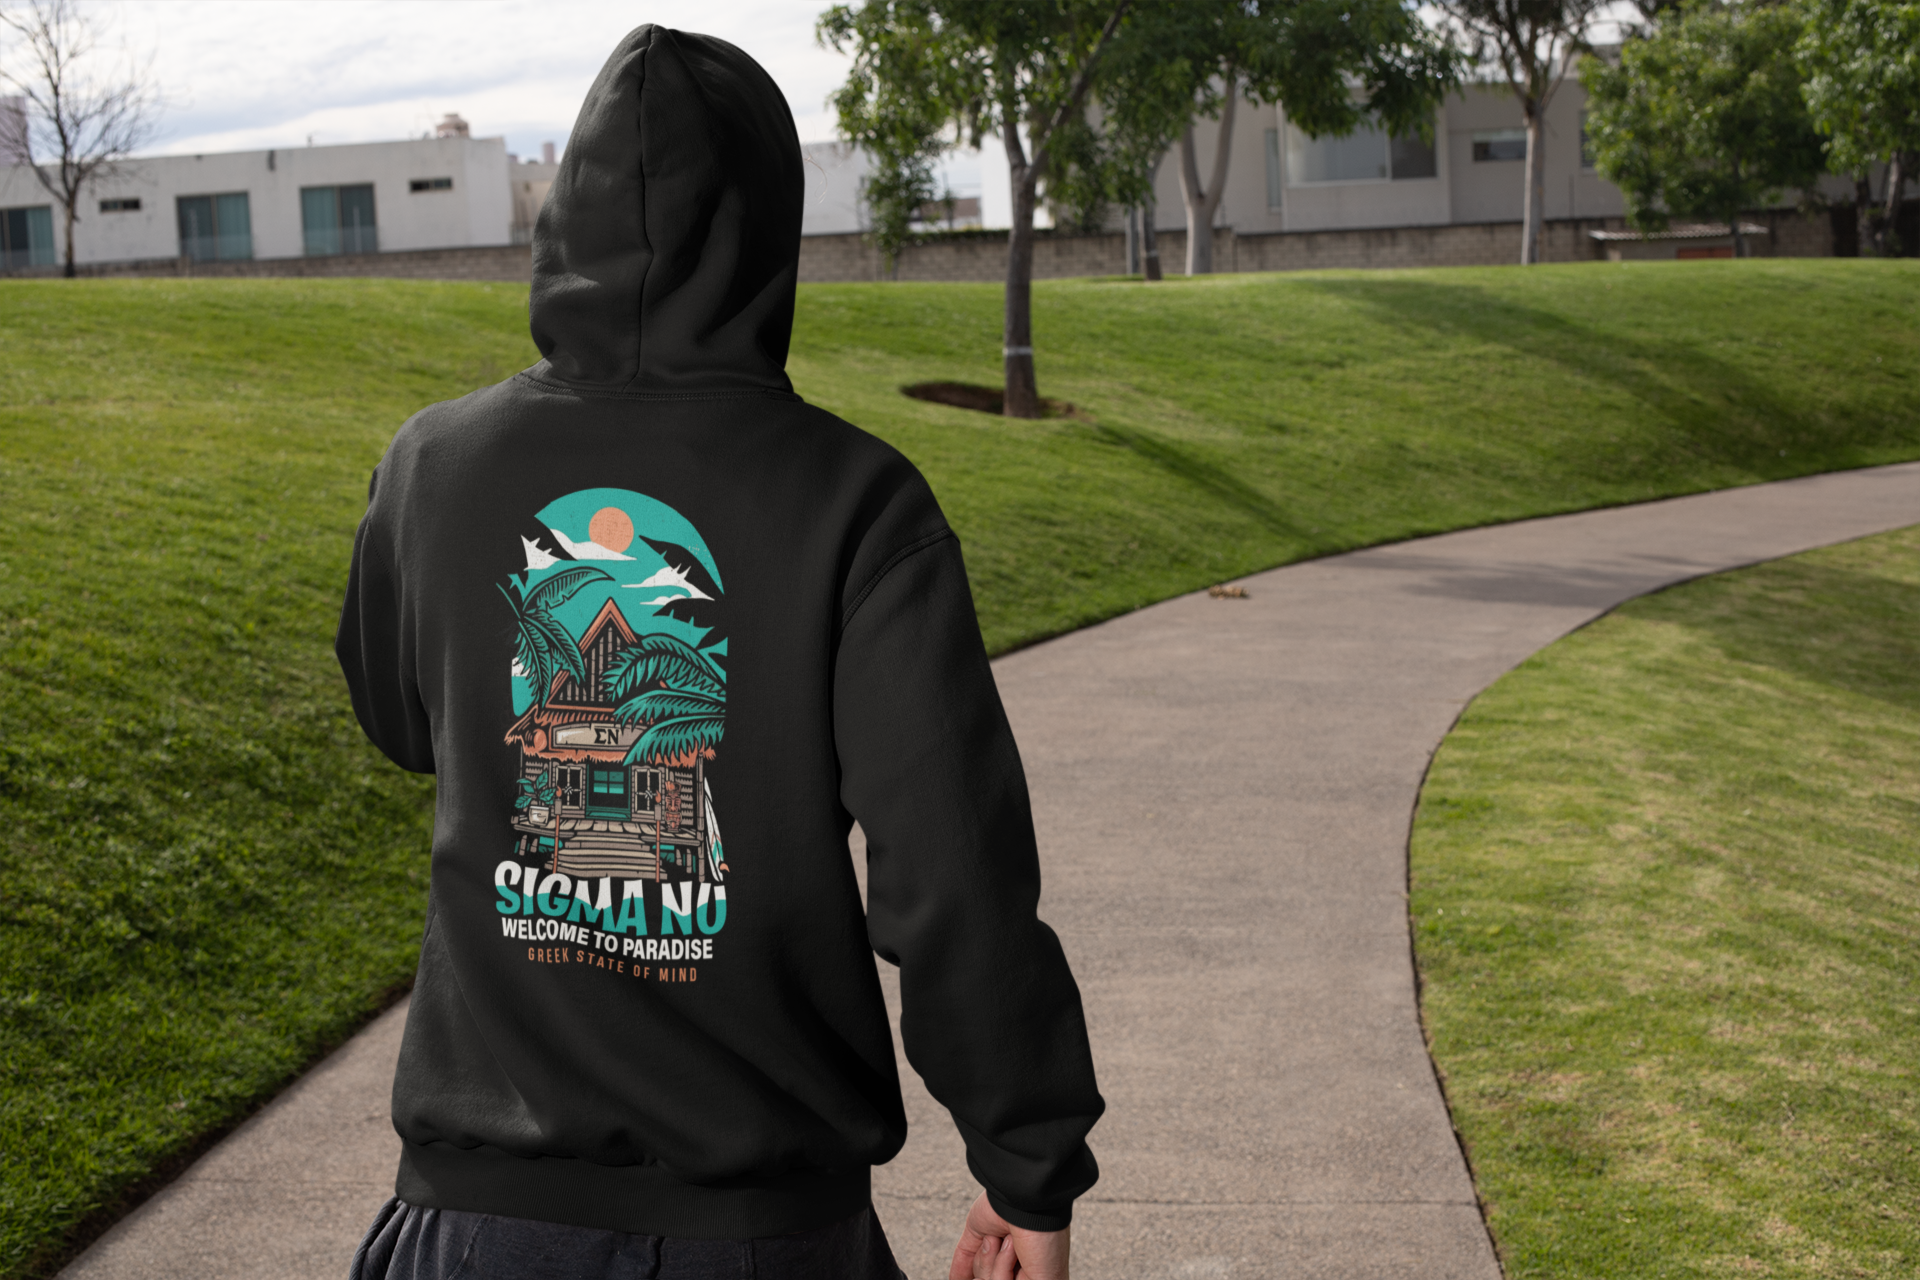 Sigma Nu Graphic Hoodie | Welcome to Paradise | Sigma Nu Clothing, Apparel and Merchandise model 